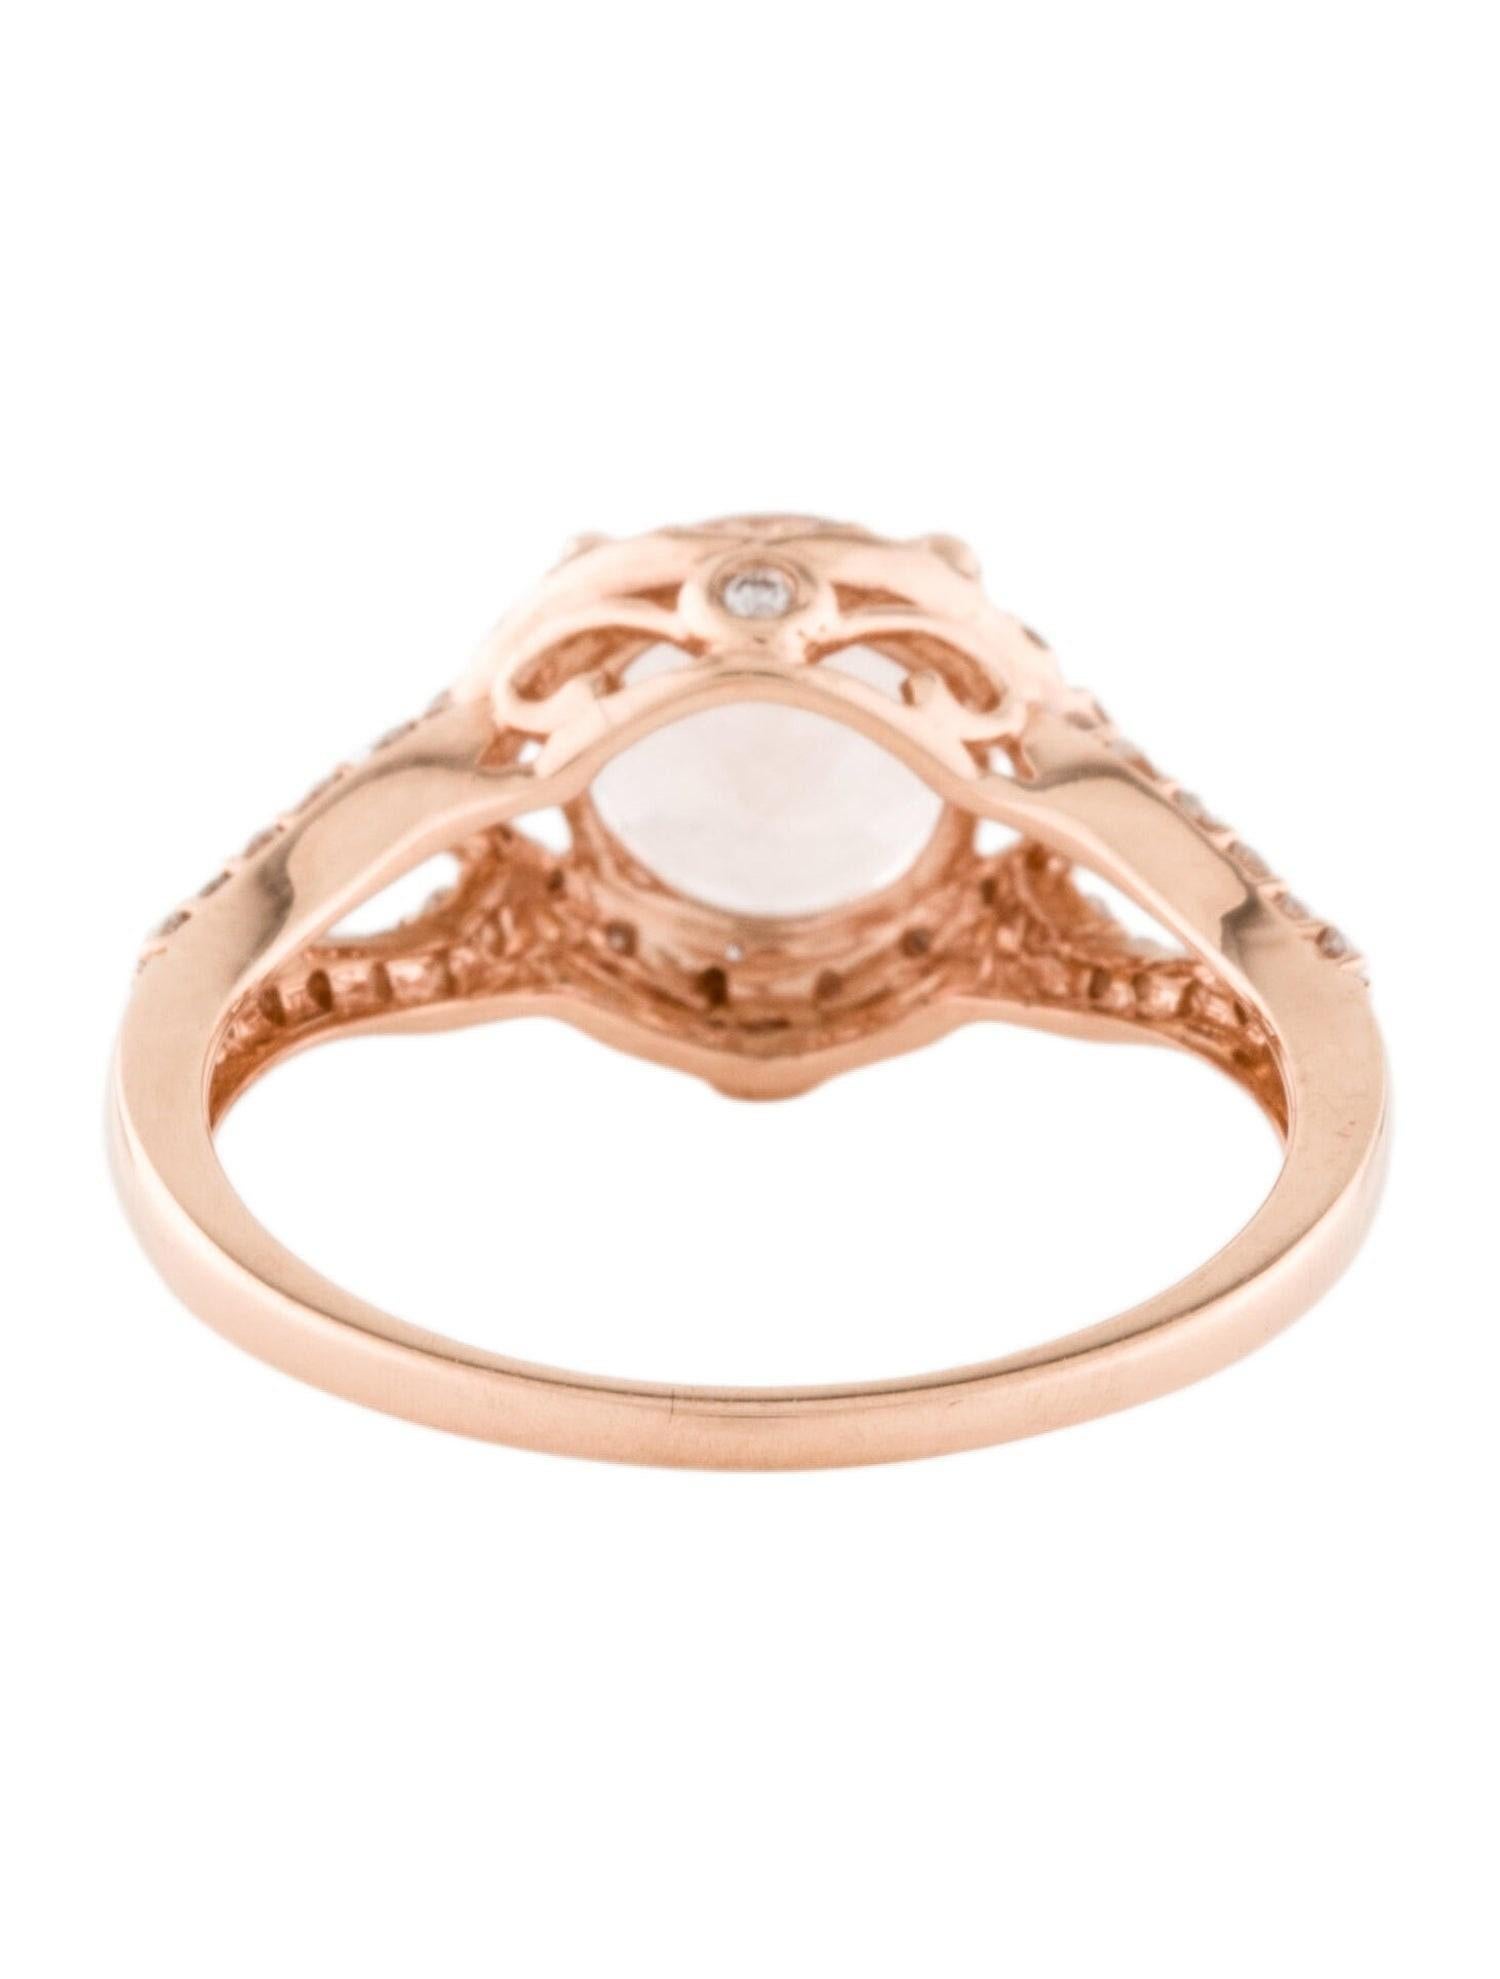 This is an alluring natural 1.36CT morganite and diamond ring set in solid 14K rose gold. The natural round cut morganite has an excellent peachy pink color and is surrounded by a halo of round cut white diamonds. The ring is stamped 14K and is a